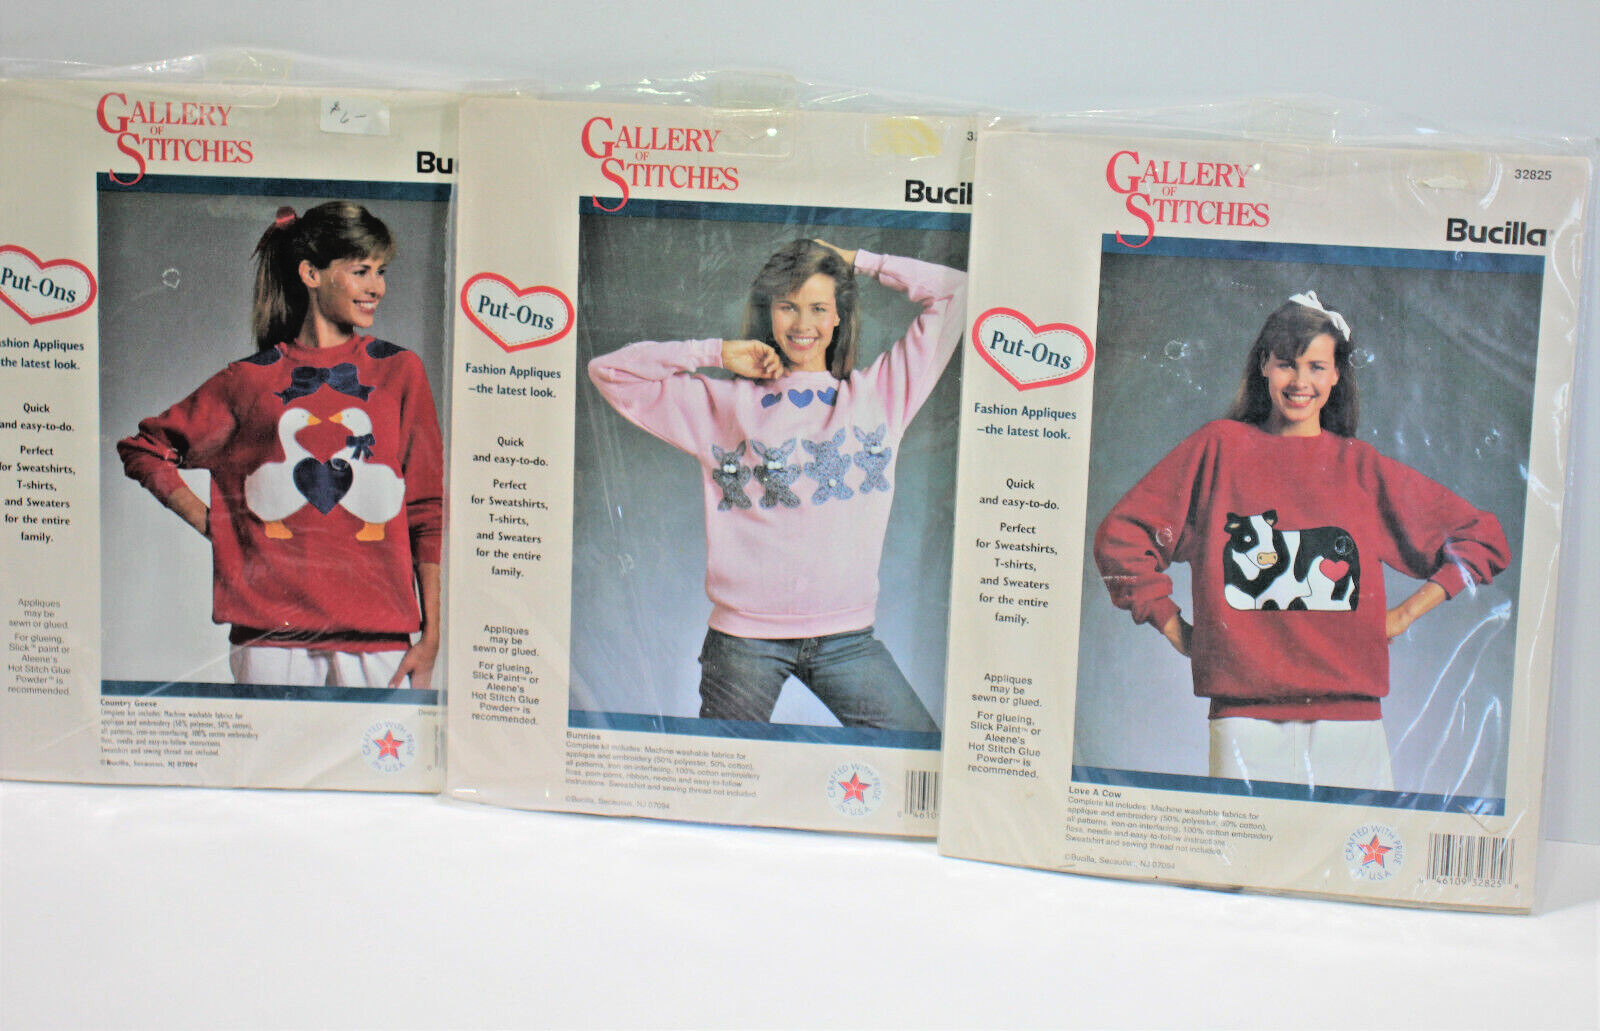 Primary image for Bucilla Gallery of Stitches Appliques Ducks Cow Bunnies Sweatshirts Lot of 3